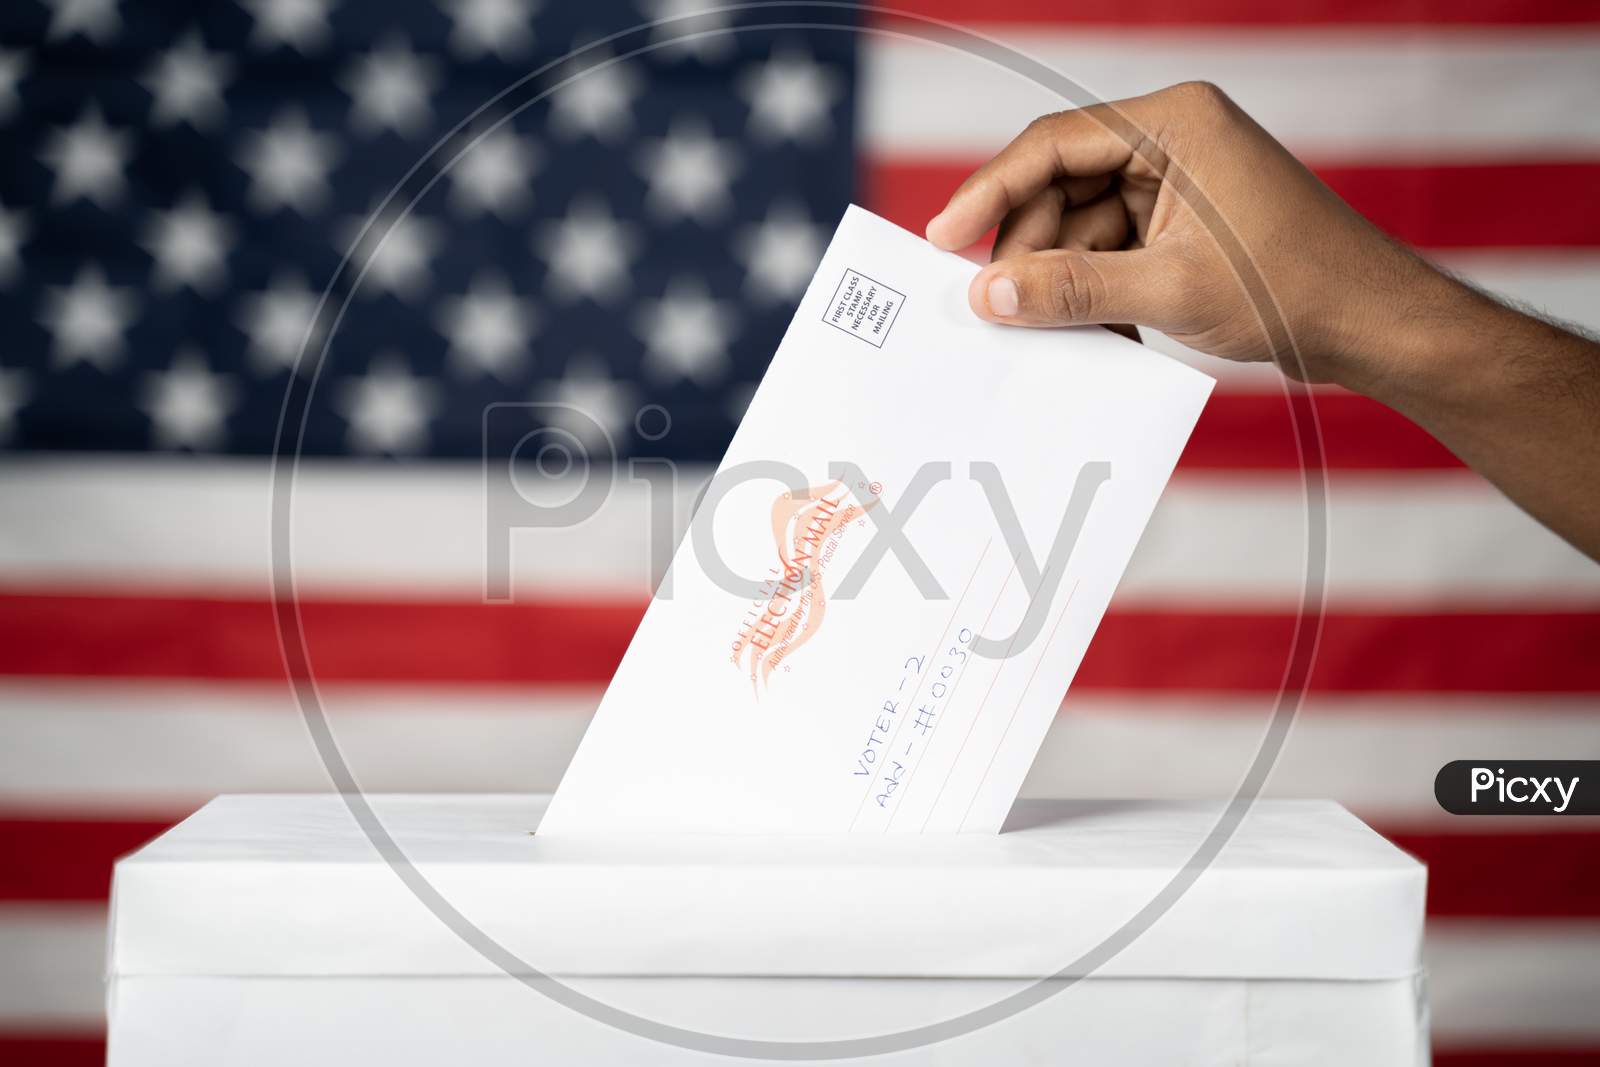 Maski, India 14 September, 2020 : Concept Of Mail In Vote At Us Election - Hands Dropping Mail Inside The Ballot Box With Us Flag As Background.